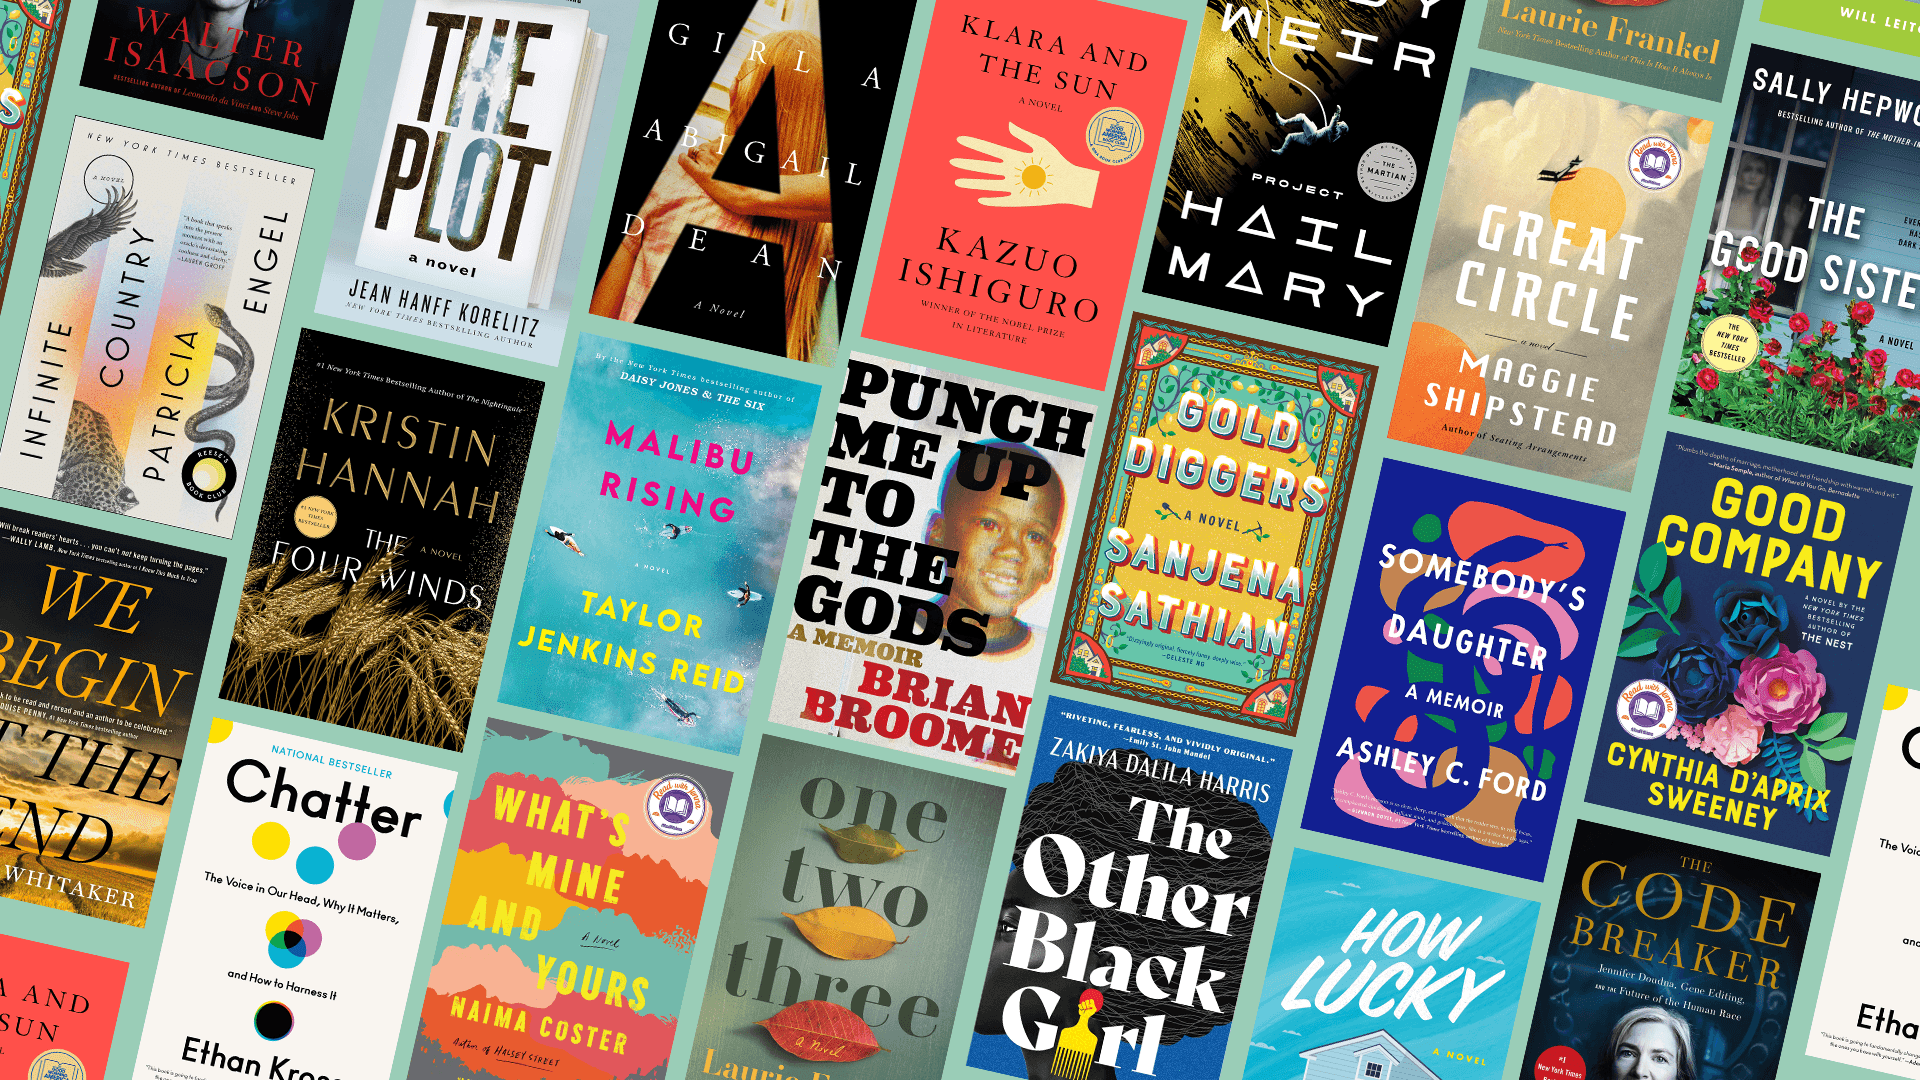 An image of book covers that show some of the best books of the year so far (full list below).